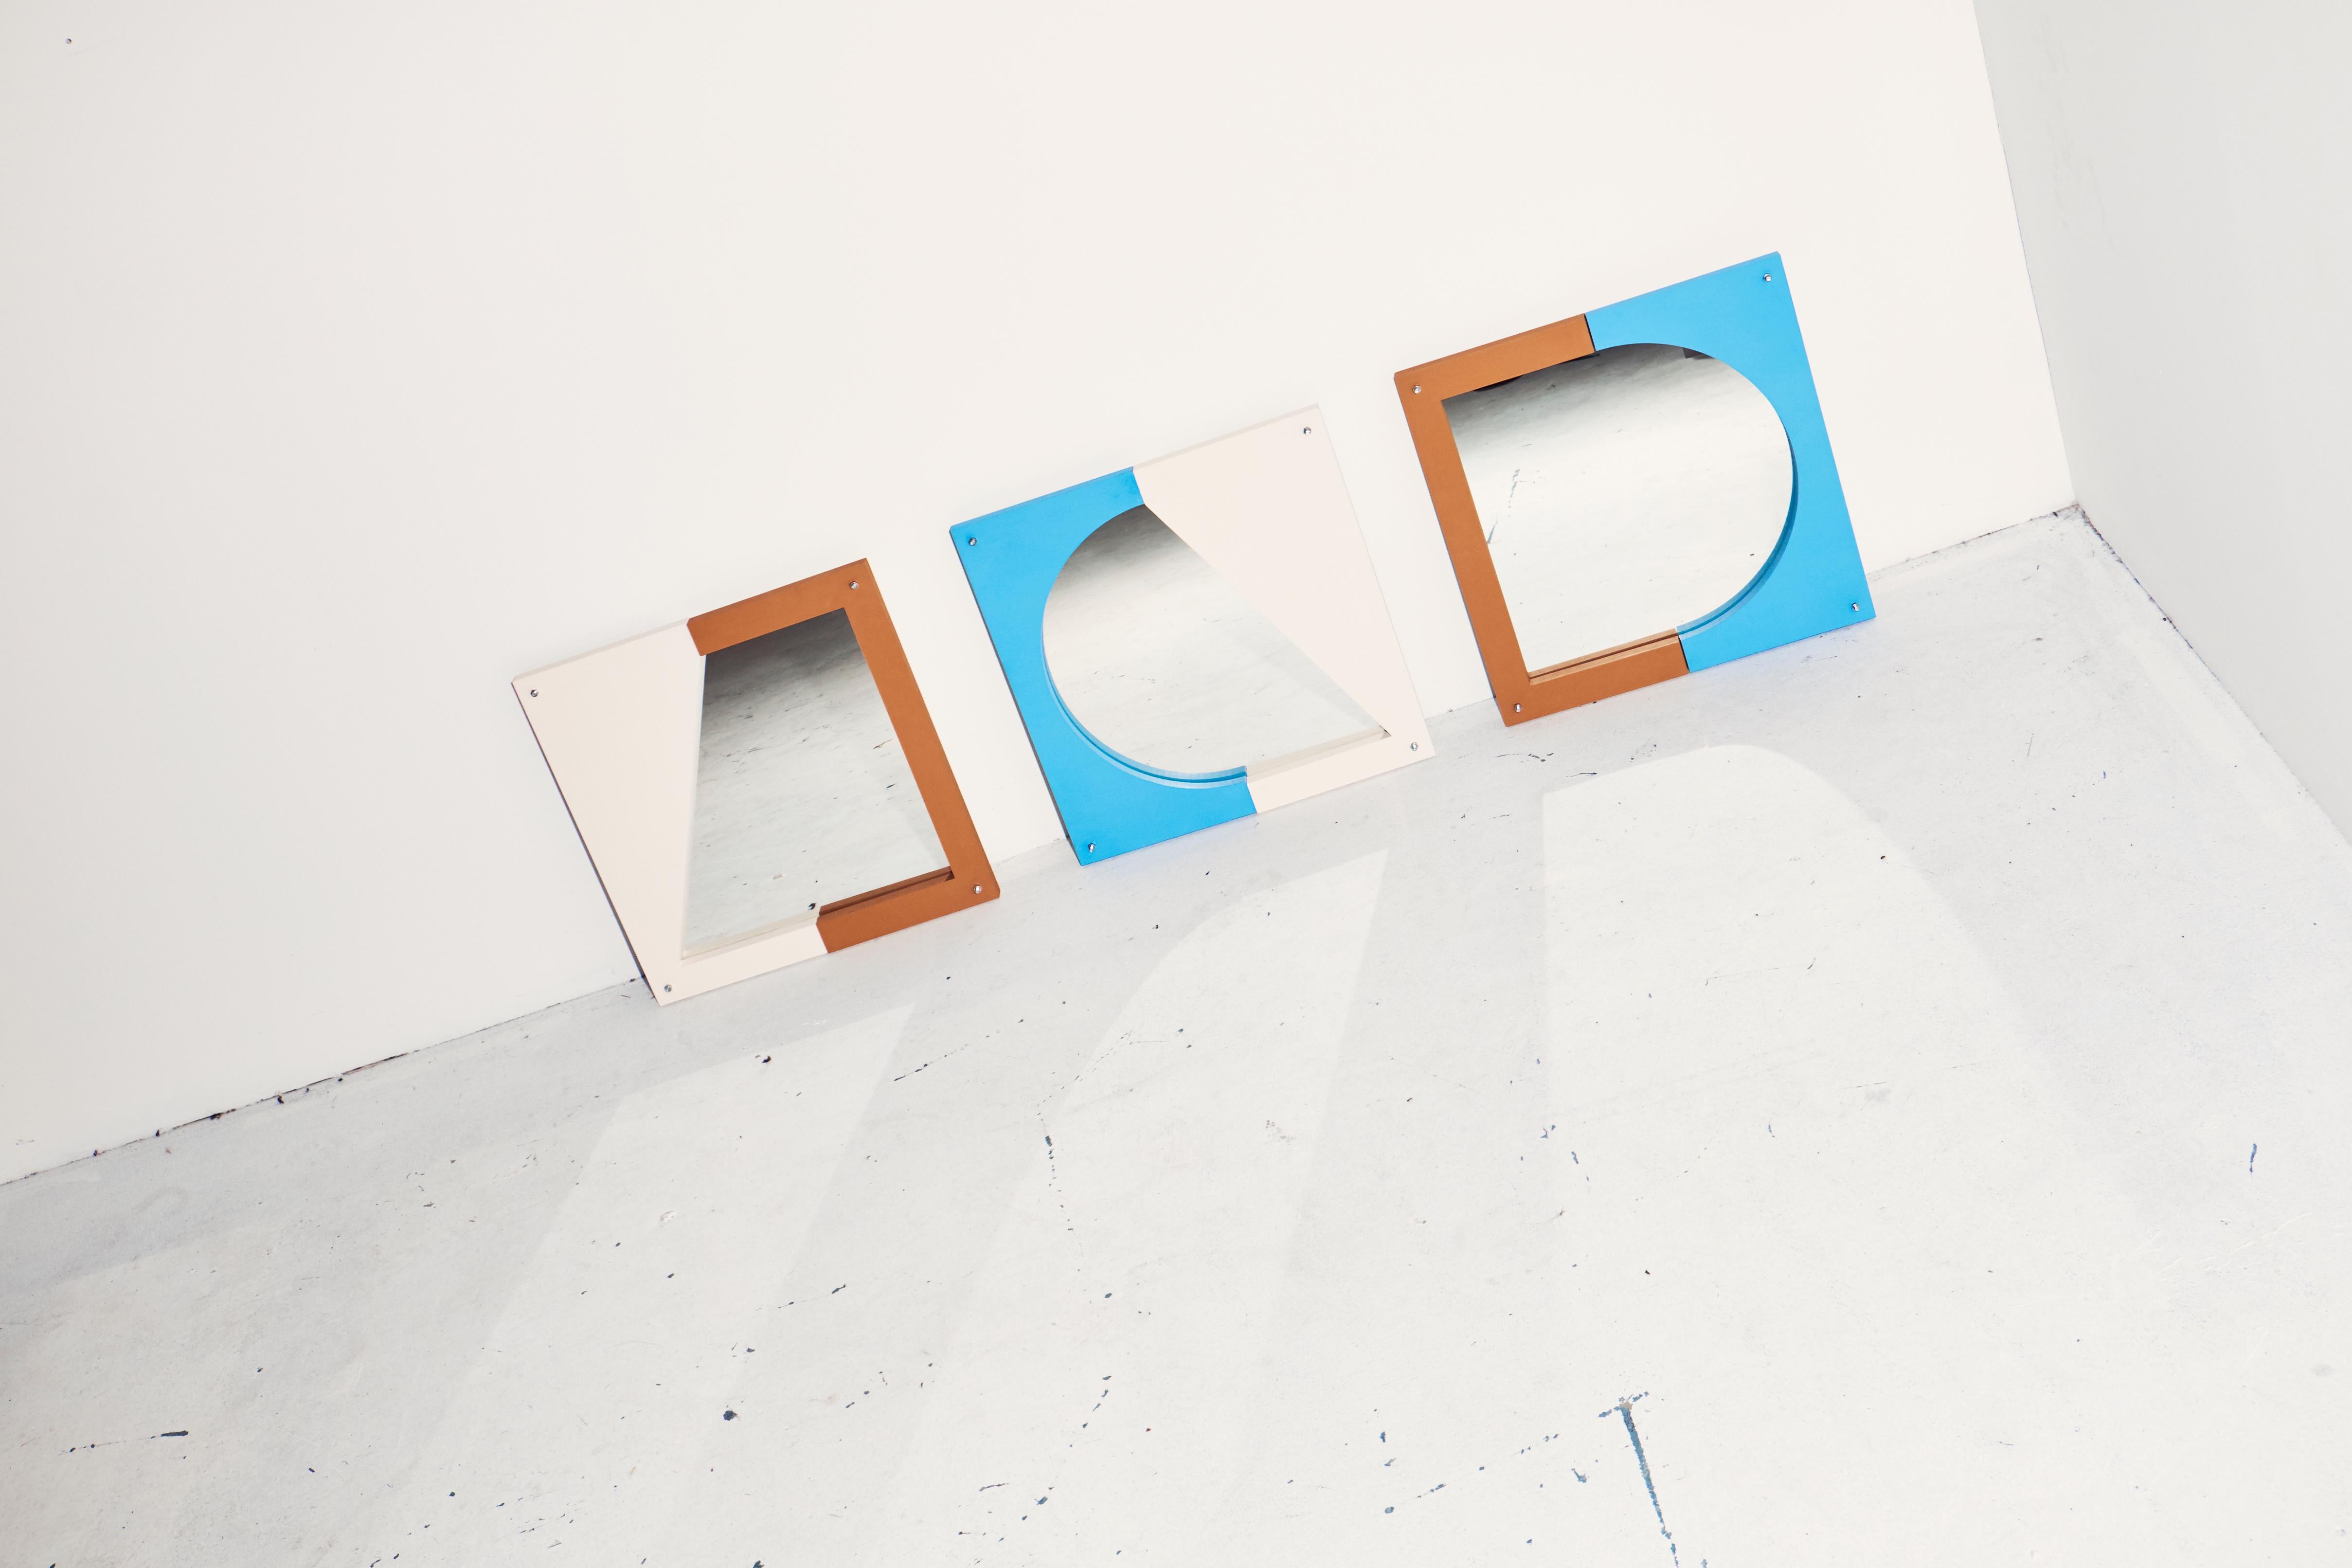 Set of 3 mould mirrors by Theodora Alfredsdottir.
Unique set.
Materials: MDF.
Dimensions: 40 x 40 x 3 cm 

Theodora Alfredsdottir is a product design studio based in London. 
Theodora is an Icelandic product designer. She holds a bachelor’s